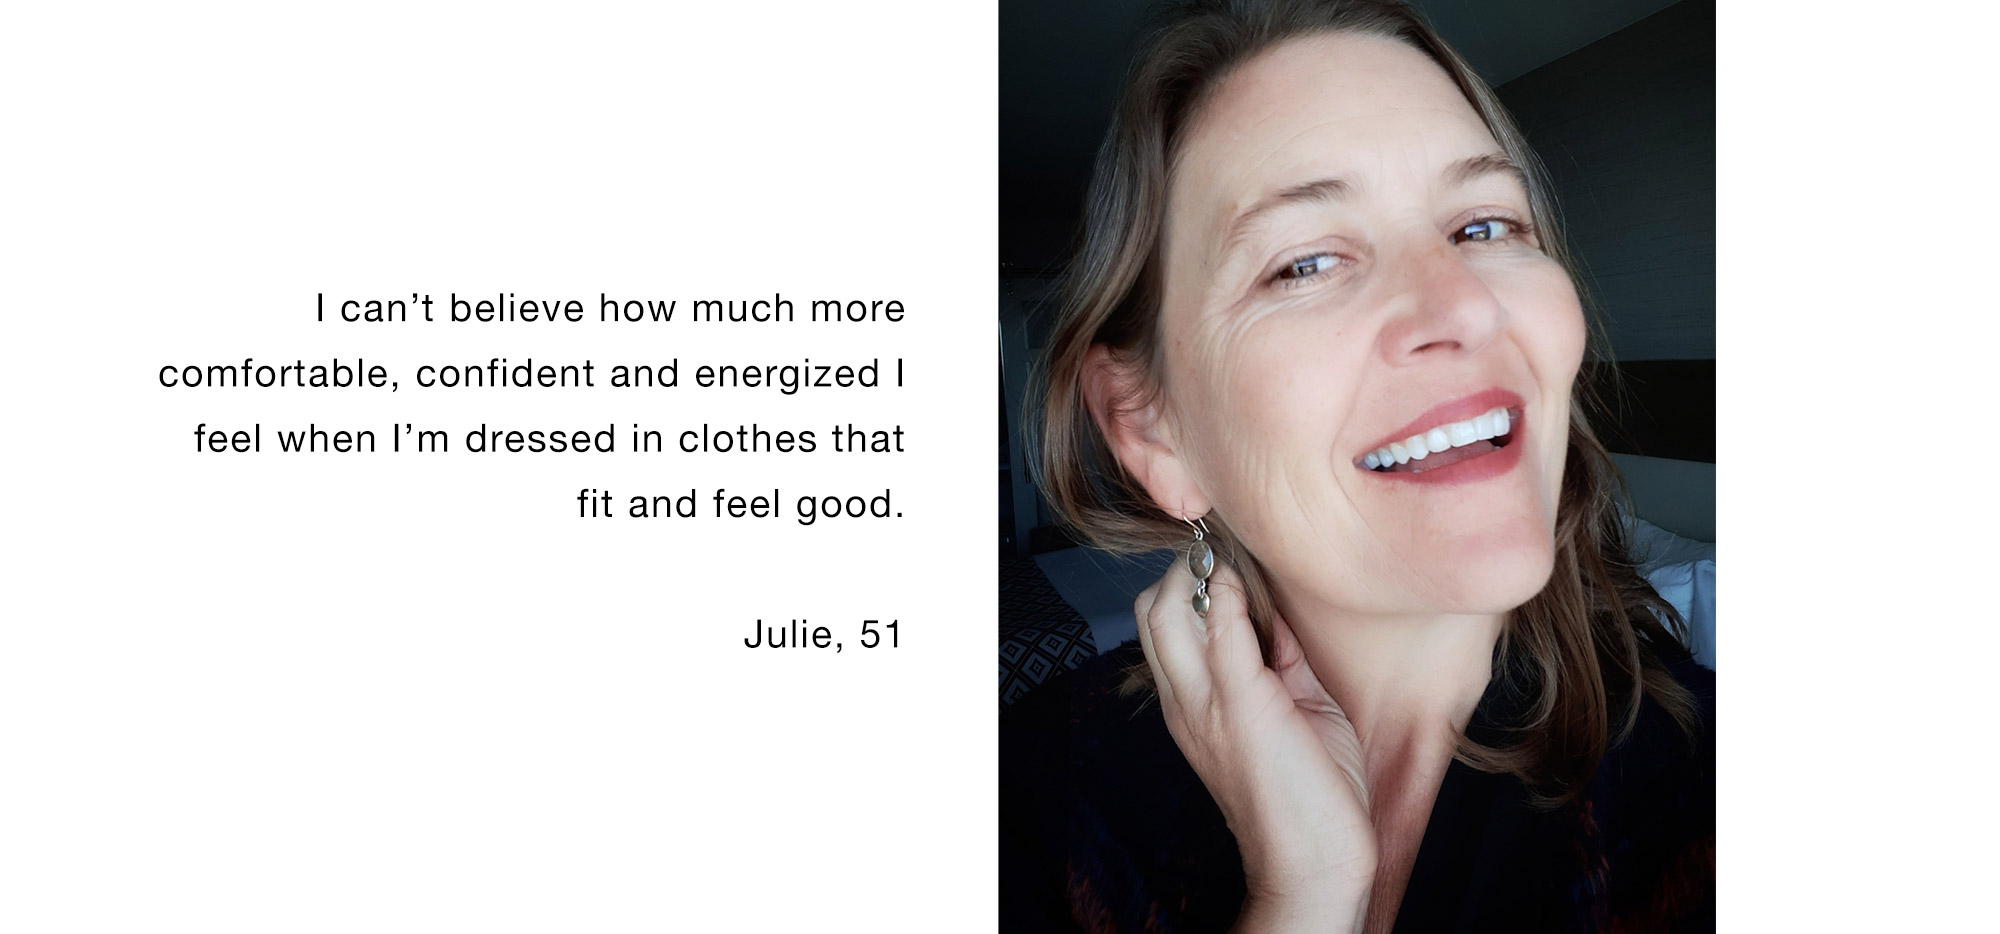 I can’t believe how much more comfortable, confident and energized I feel when I’m dressed in clothes that fit and feel good. Julie, 51